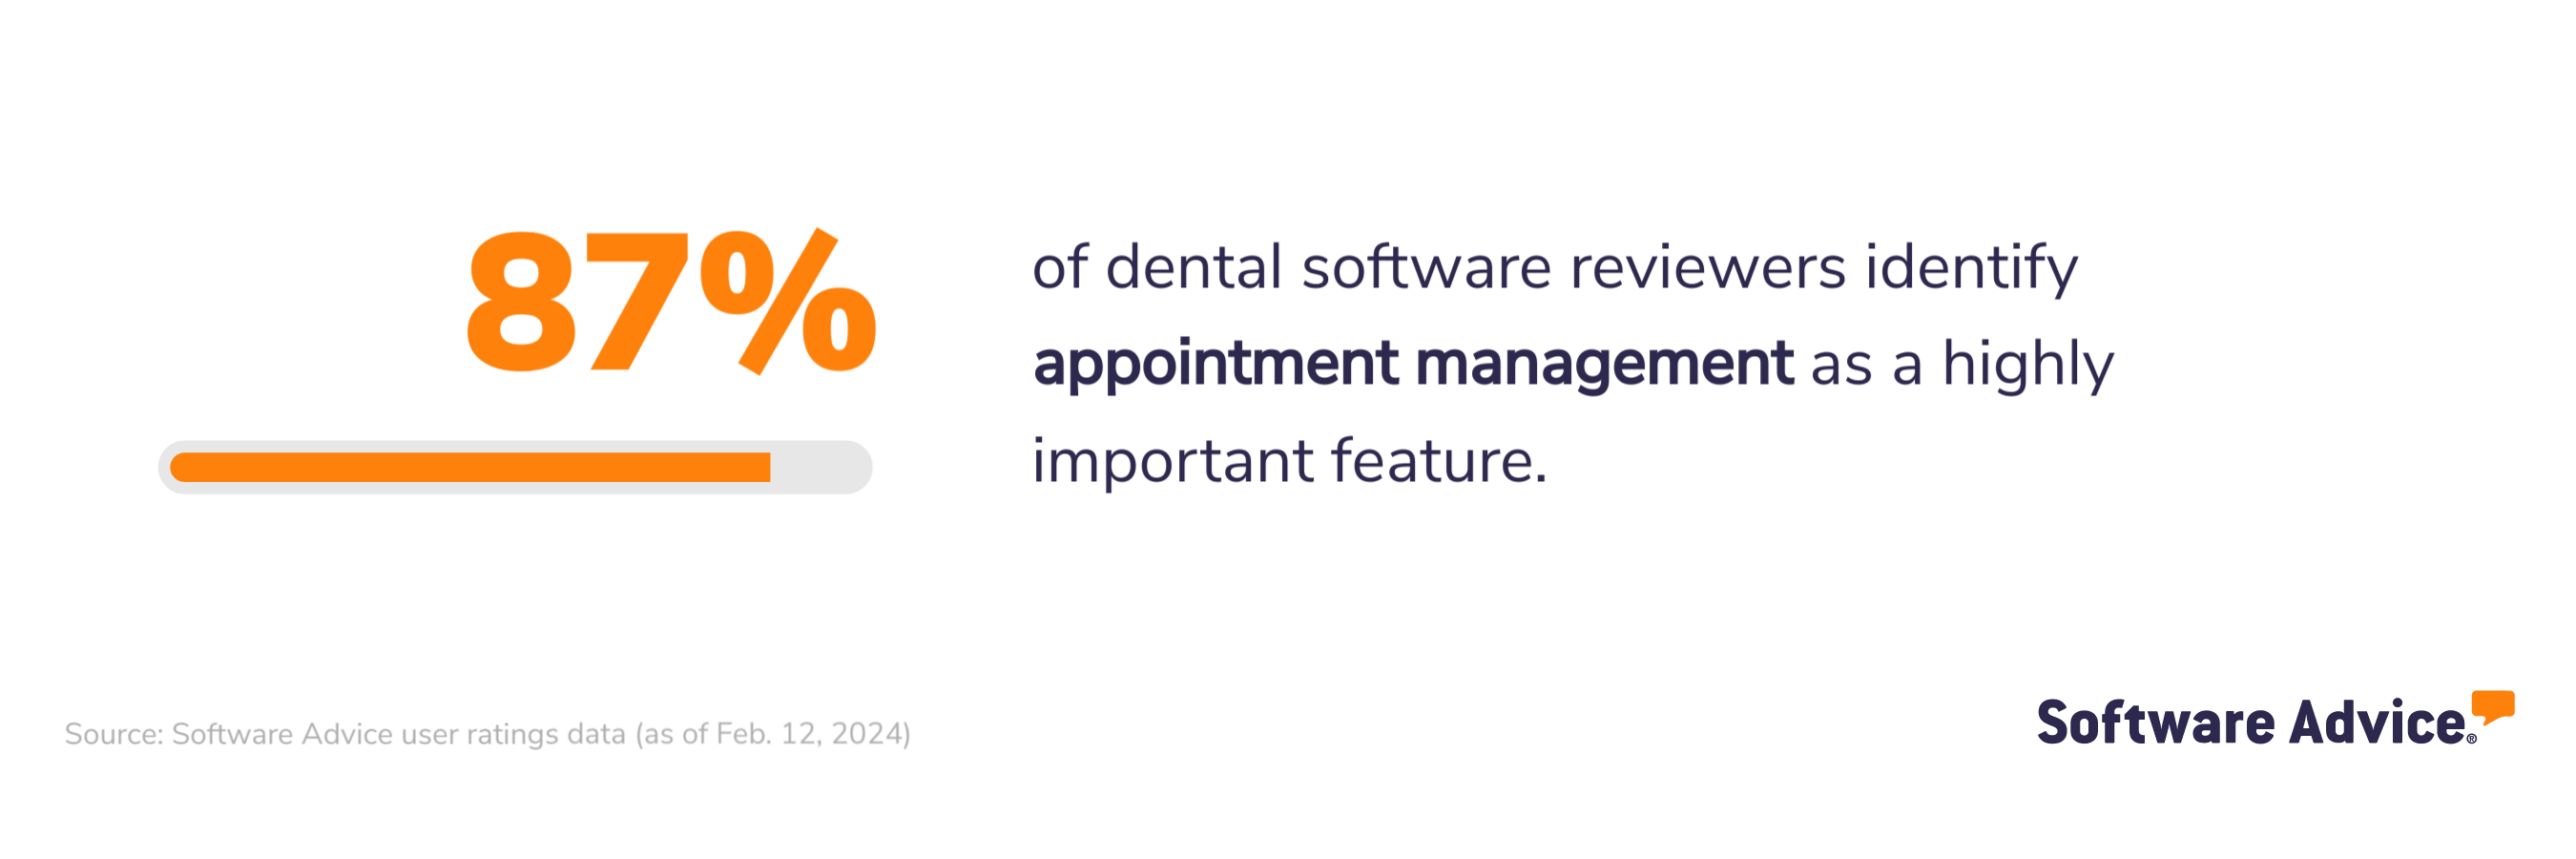 87% of dental software reviewers identify appointment management as a highly important feature